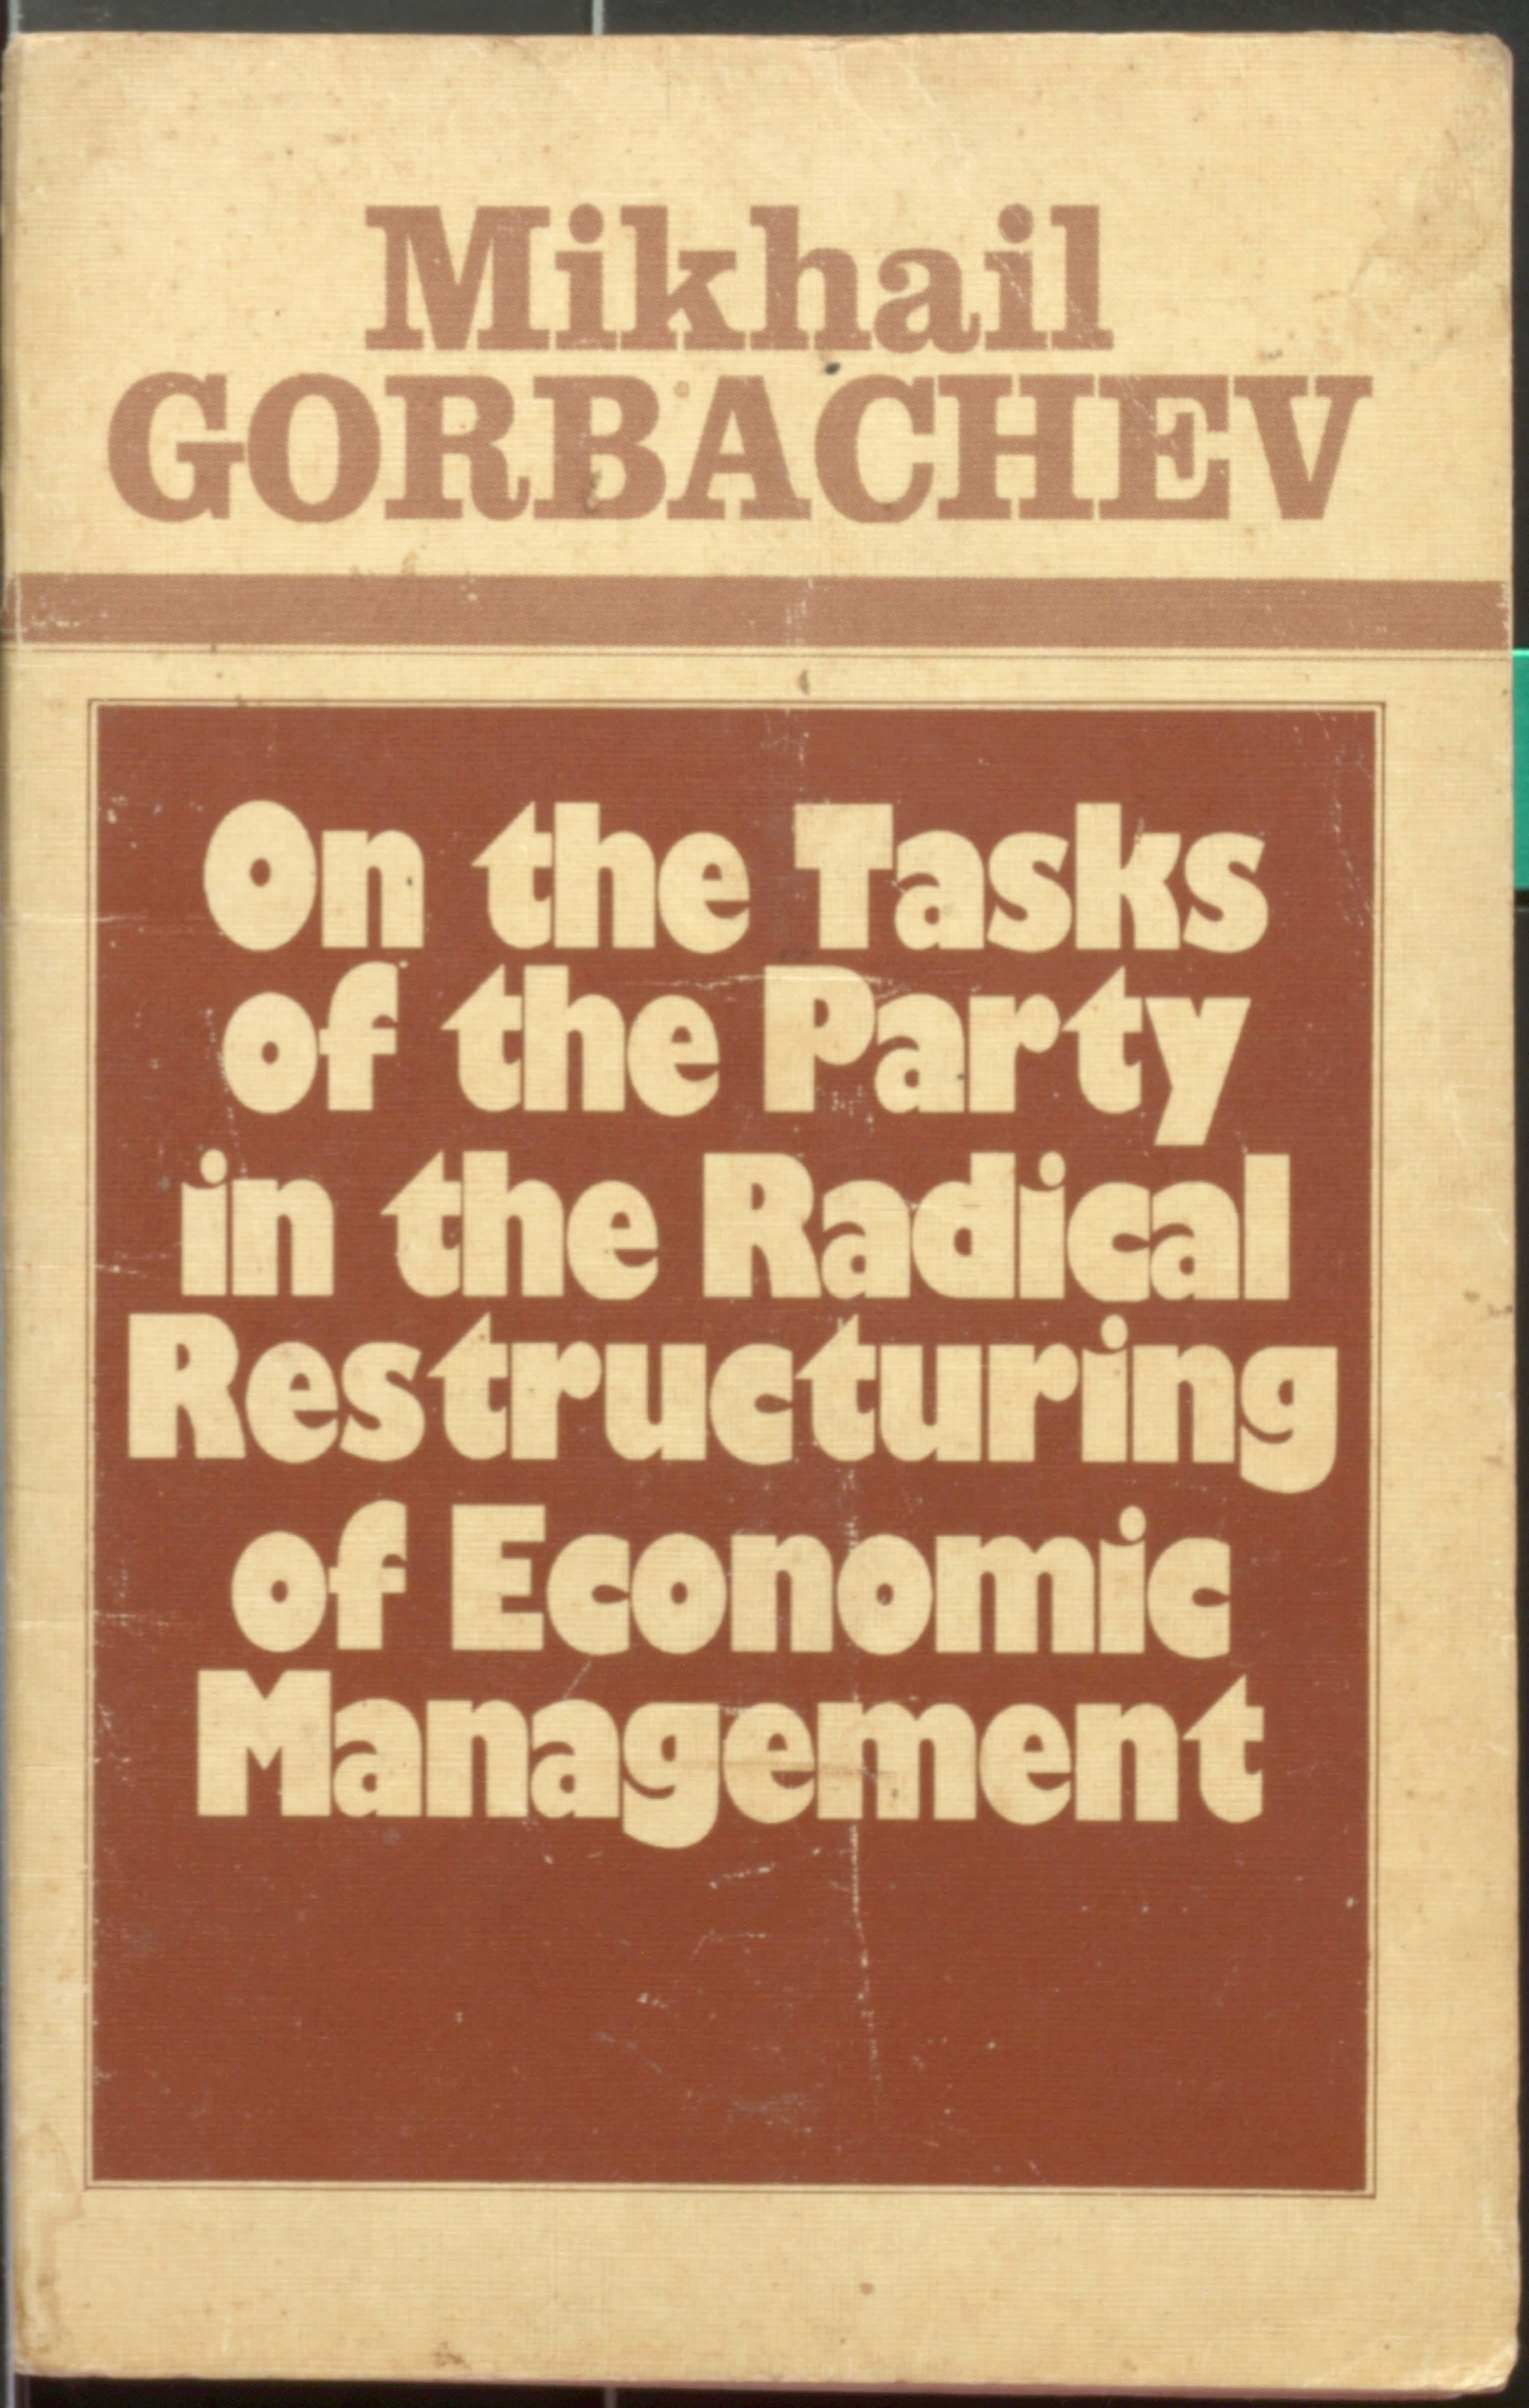 MIKHAIL GORBACHEV ON THE TASKS OF THE PARTY IN THE RABICAL RESTRUCTURING OF ECONOMIC MANAGEMENT.